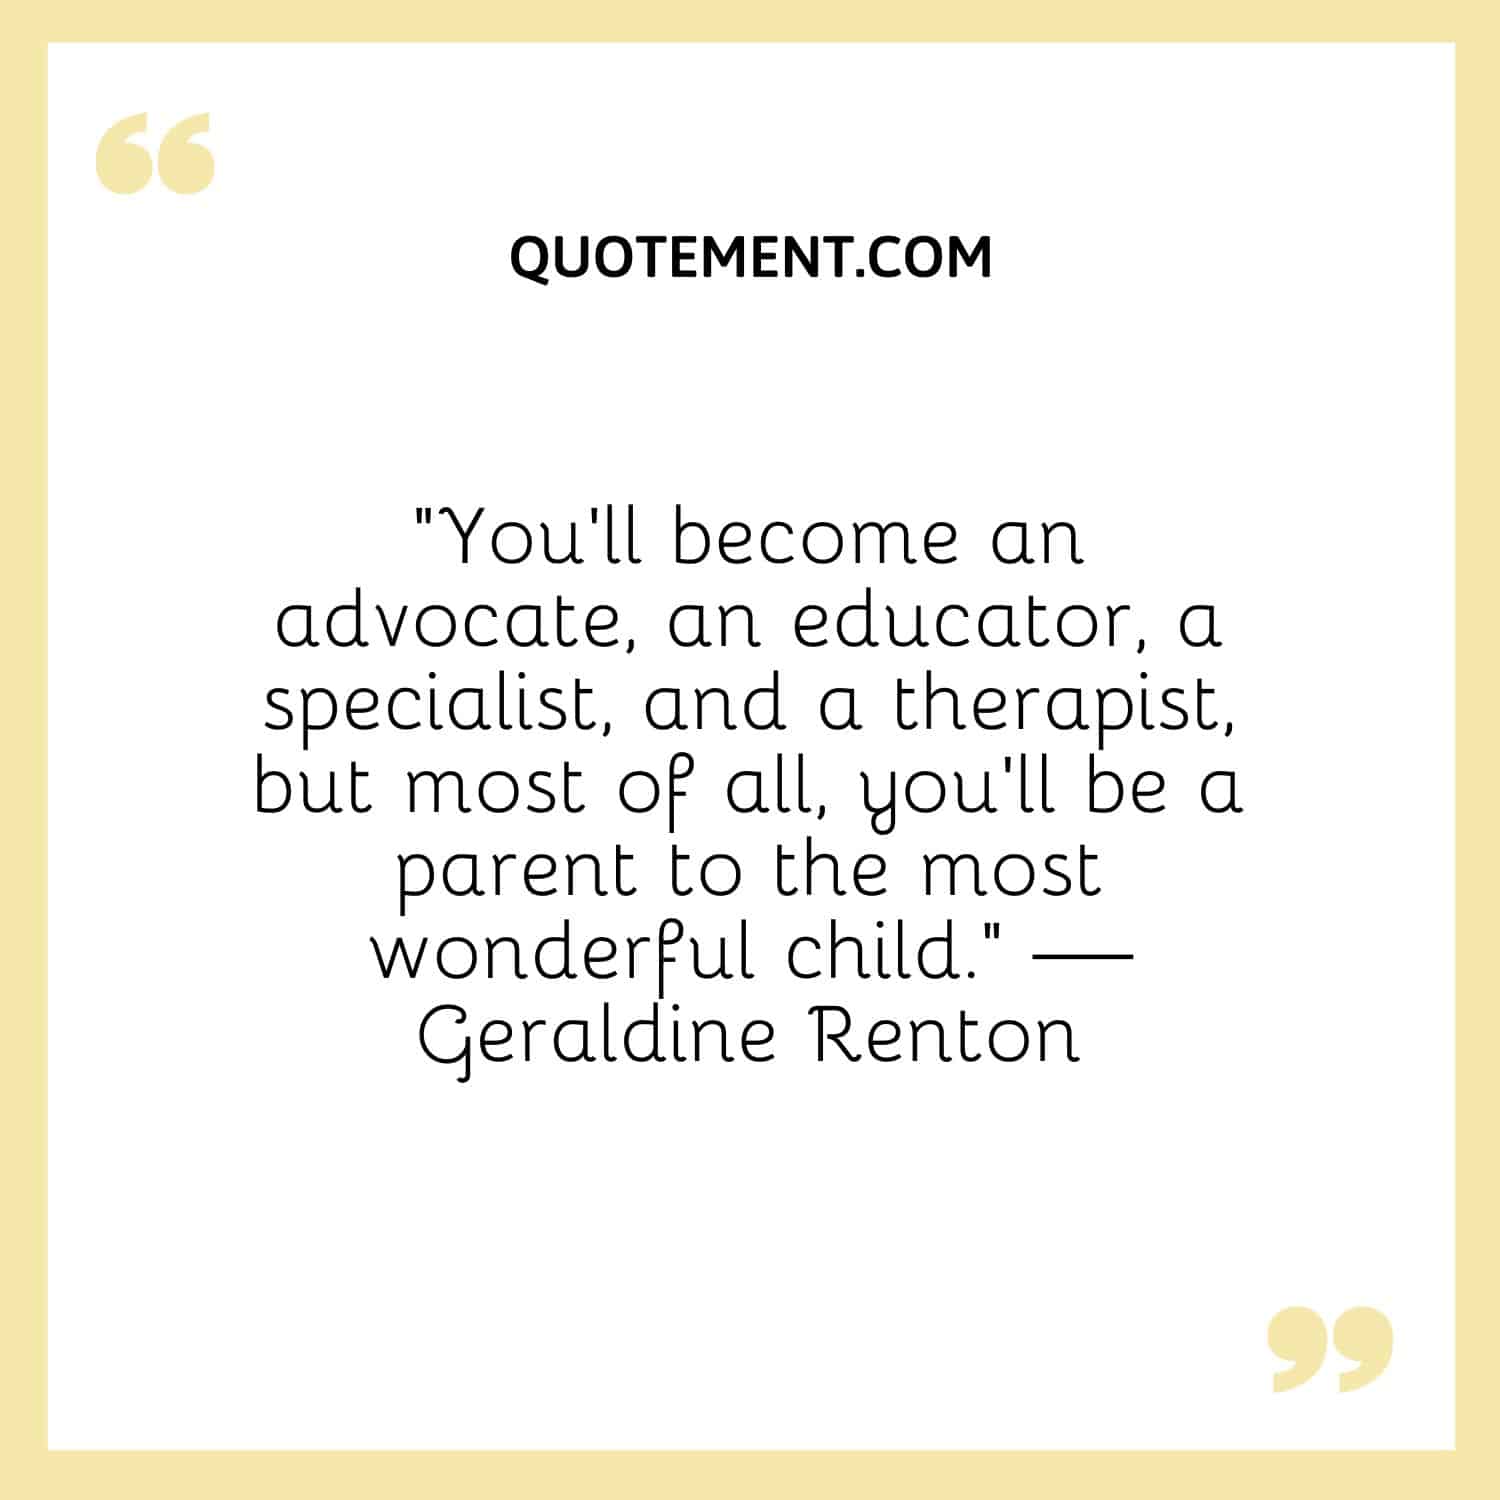 You’ll become an advocate, an educator, a specialist, and a therapist